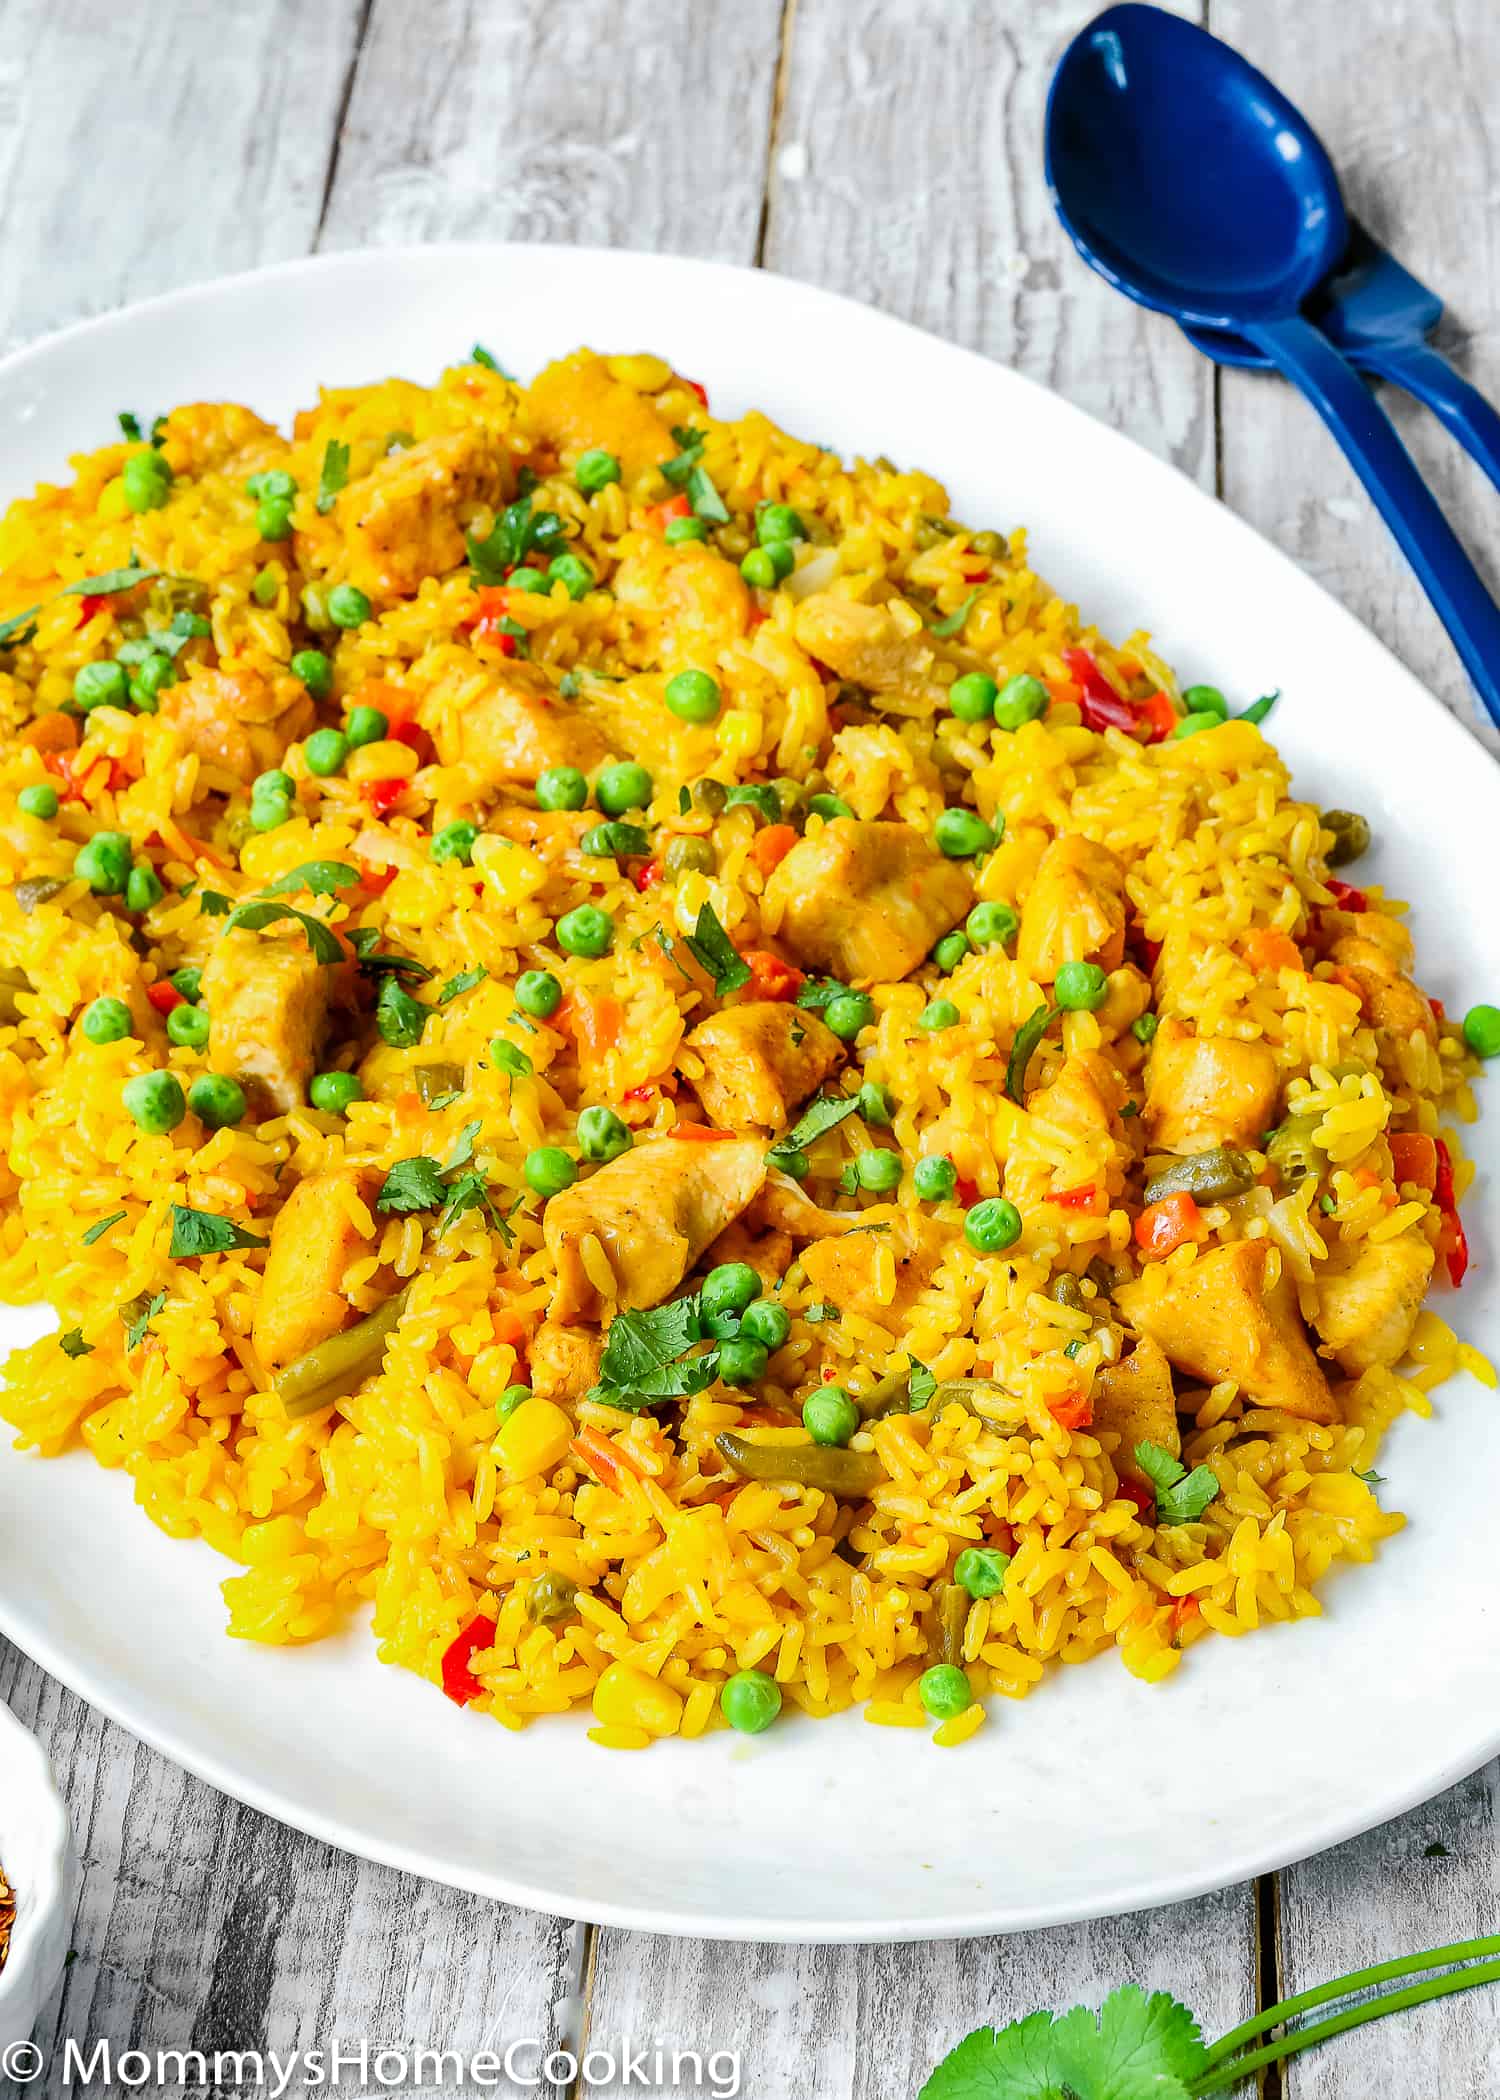 This Easy Instant Pot Arroz con Pollo recipe is ridiculously easy to make and unbelievably delicious! It has protein, vegetables, and grains cooked together in one pot in about 30 minutes. This one is definitely one to keep in your rotation. https://mommyshomecooking.com